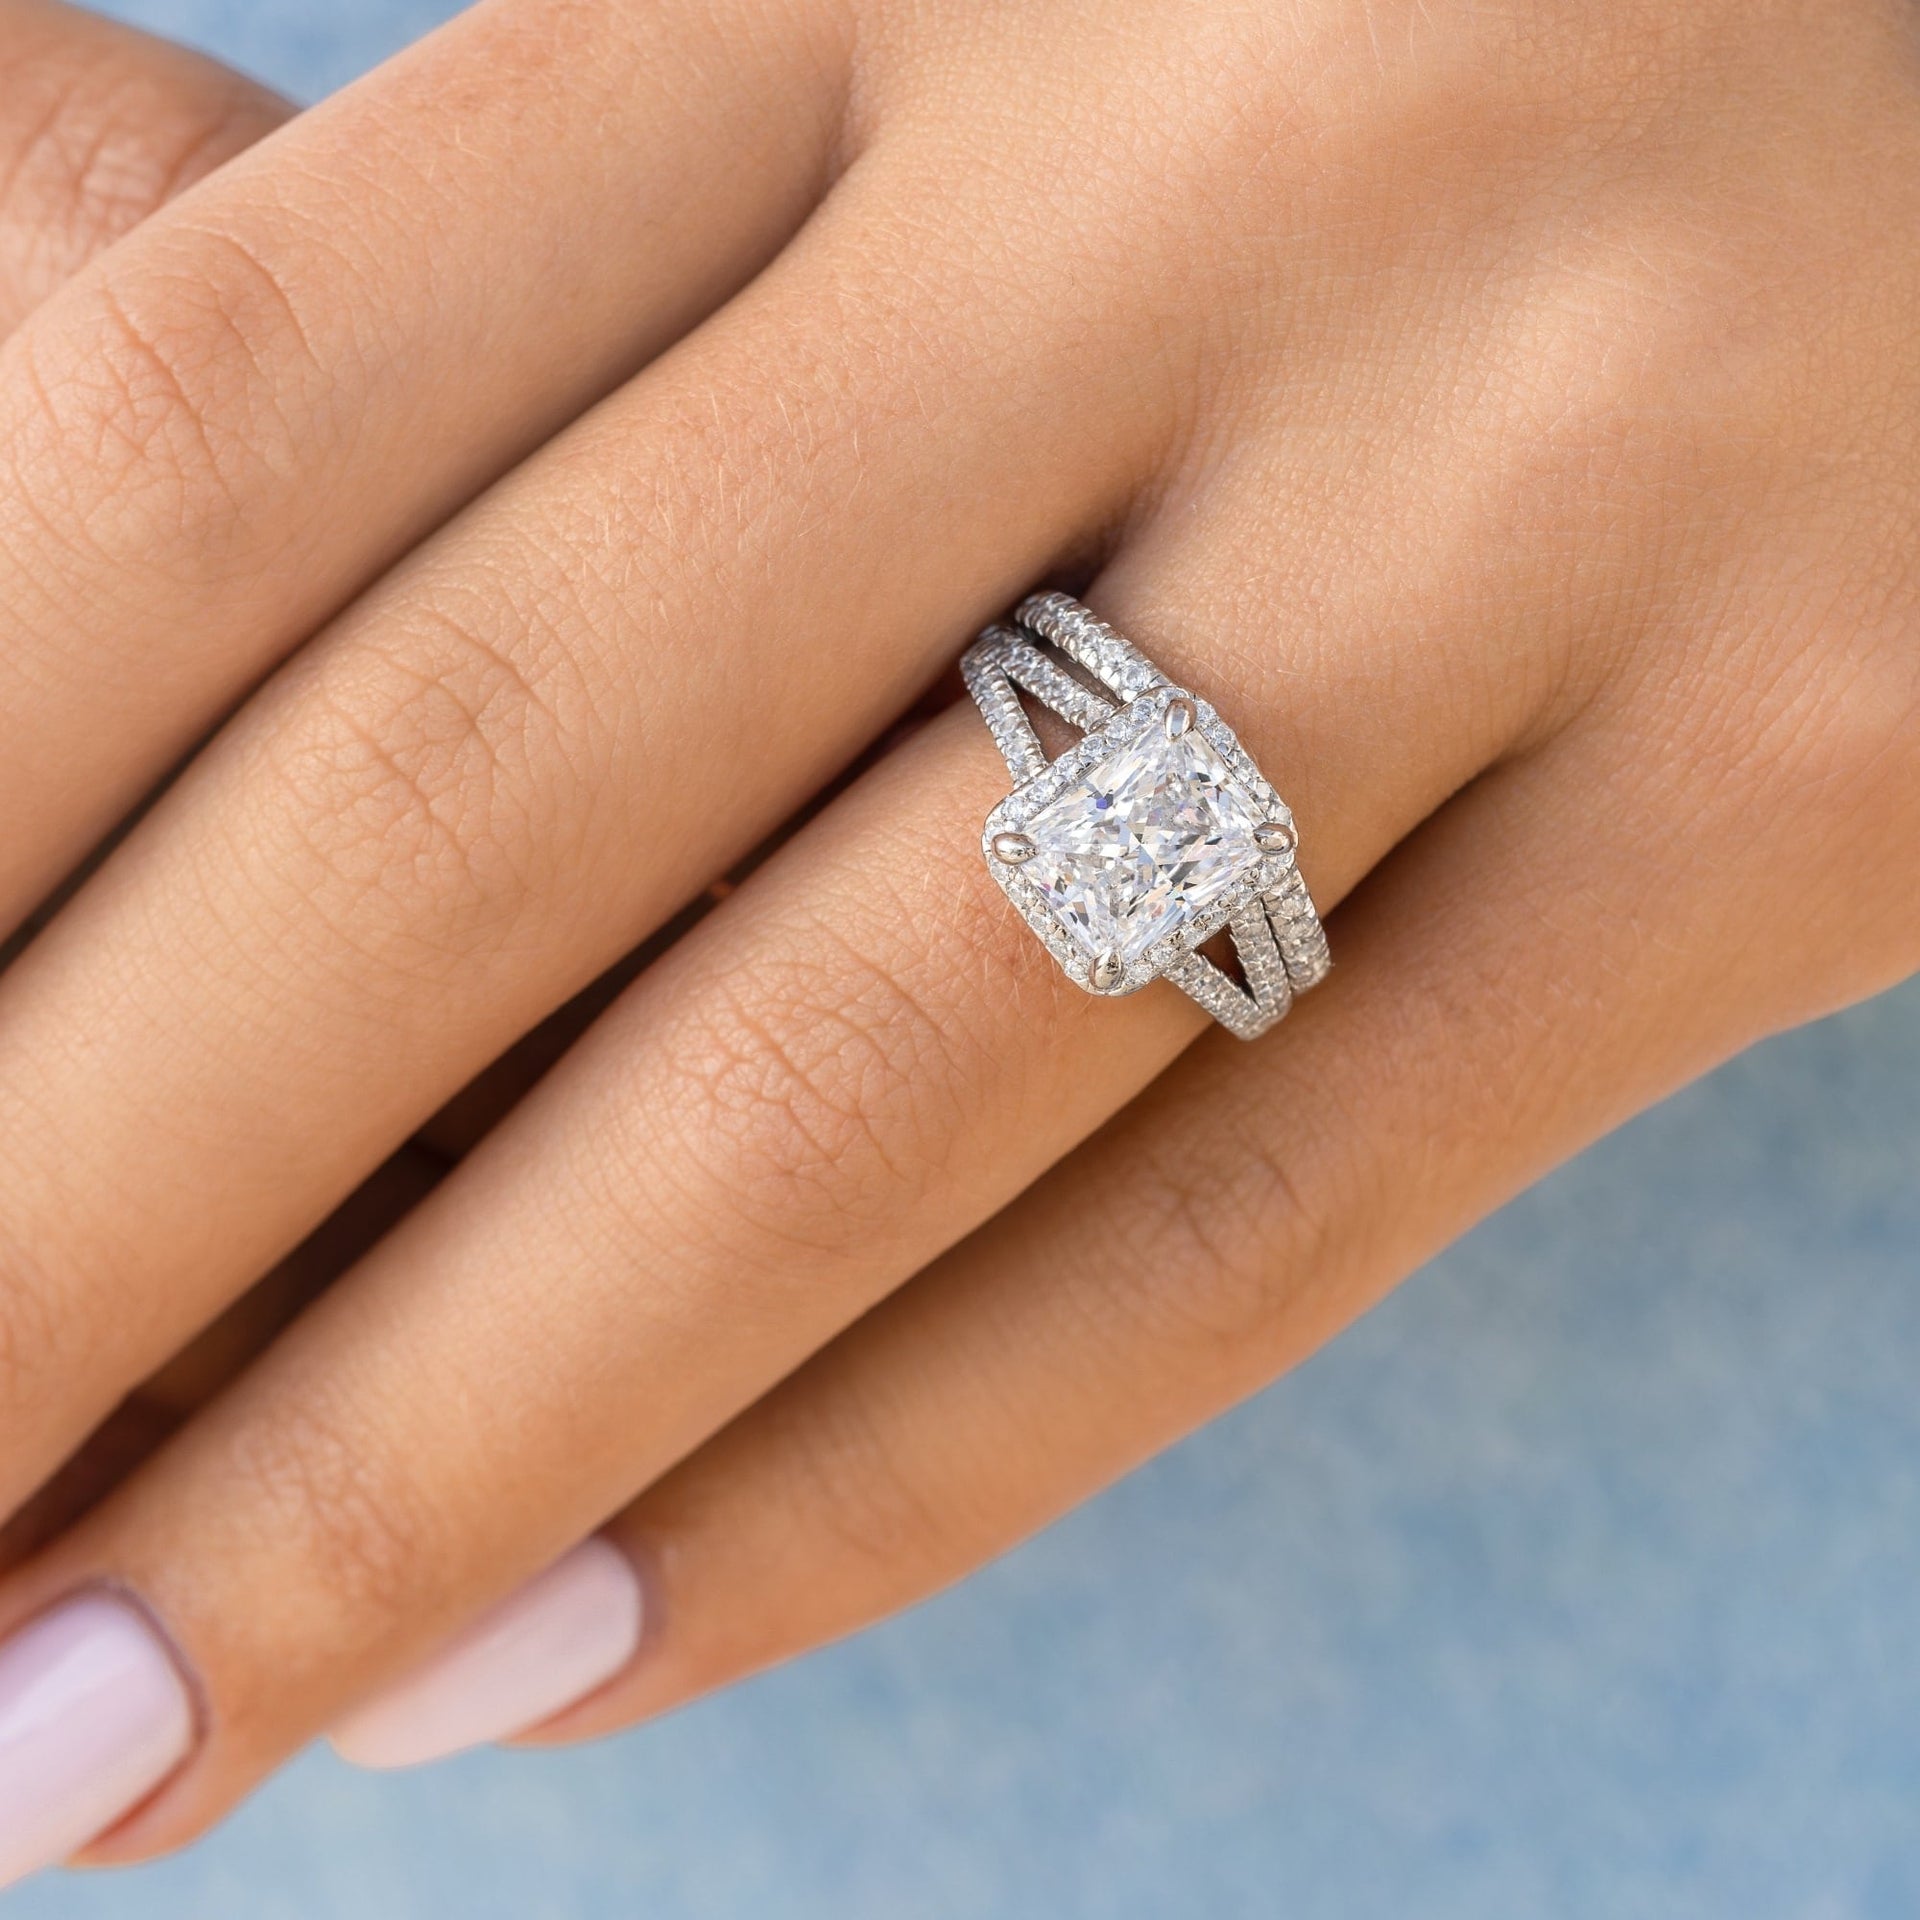 classic radiant cut engagement ring and matching half eternity band modeled on female hand